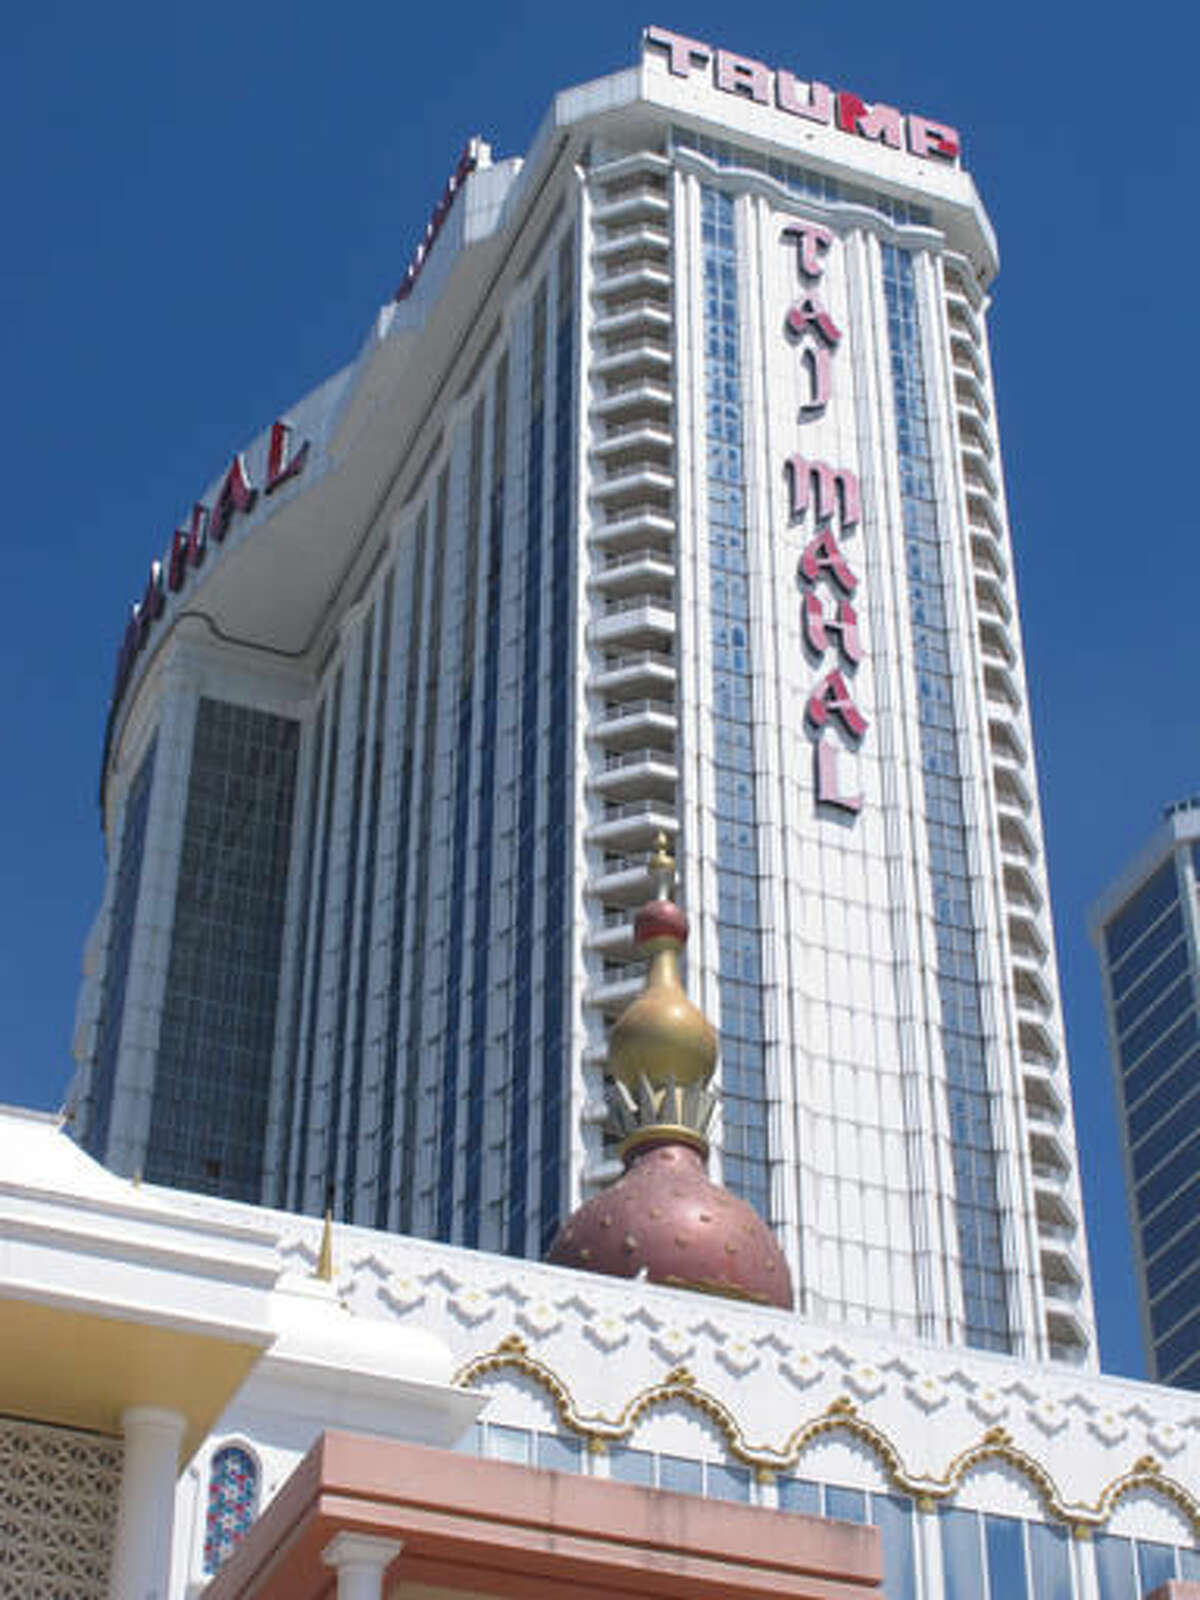 This Aug. 4, 2016 photo shows the exterior of the Trump Taj Mahal casino in Atlantic City, N.J a day after owner Carl Icahn said he will close the casino after Labor Day. (AP Photo/Wayne Parry)